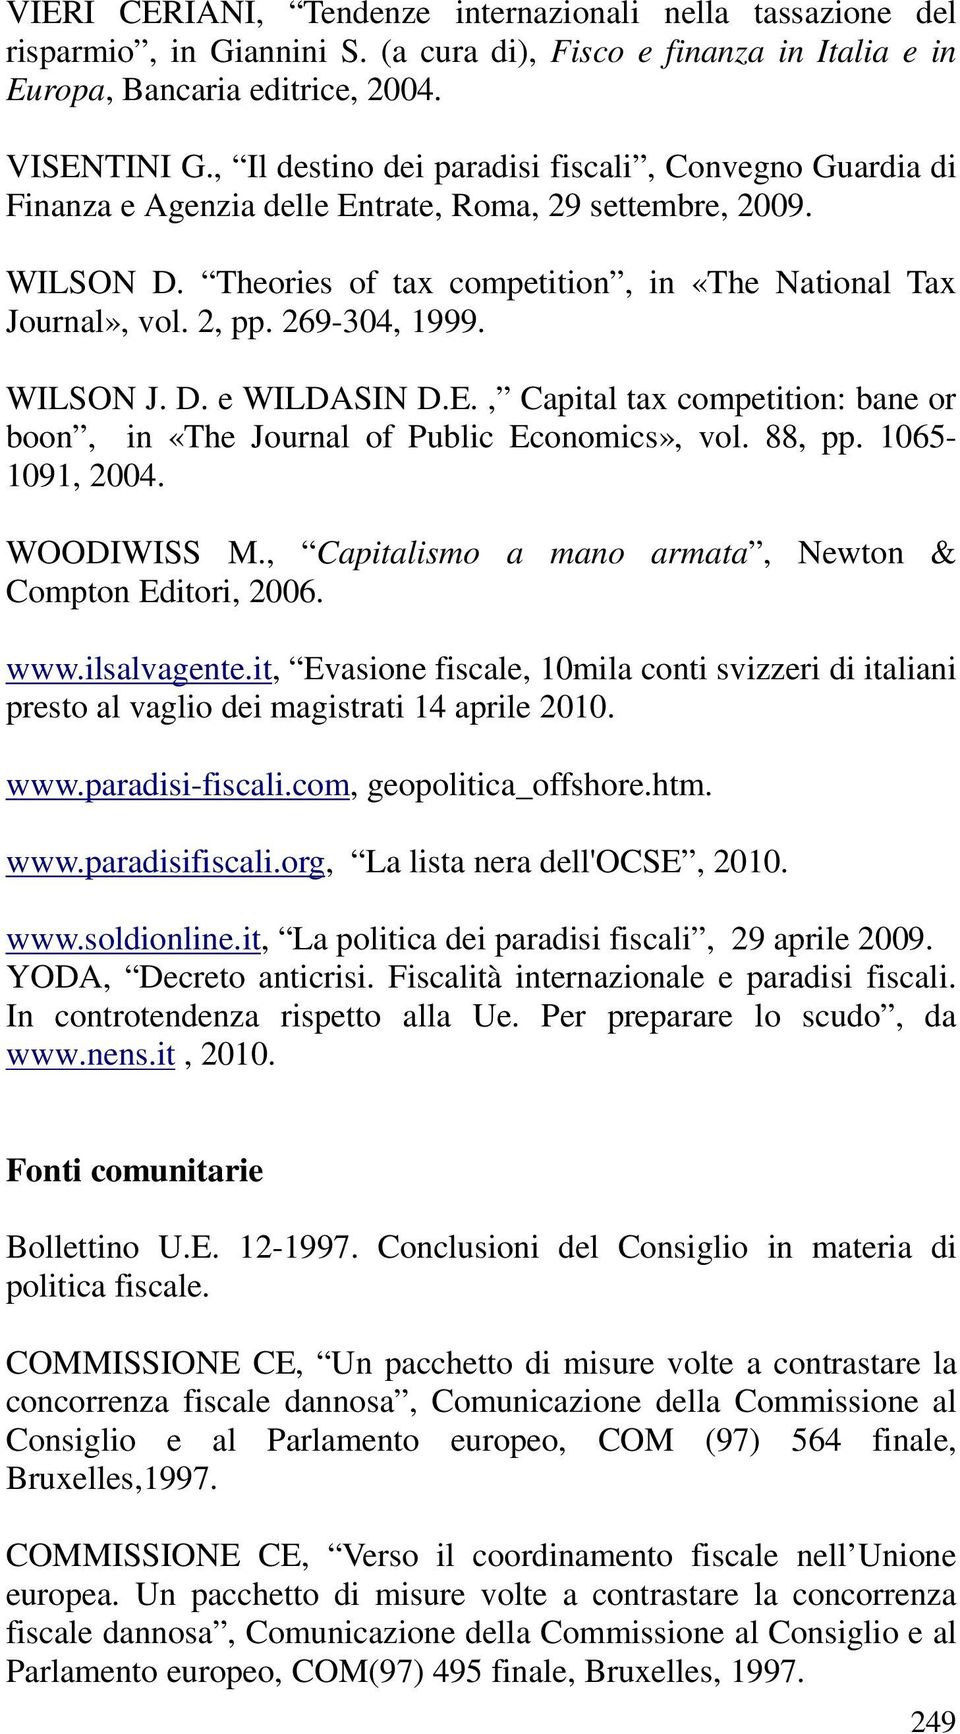 269-304, 1999. WILSON J. D. e WILDASIN D.E., Capital tax competition: bane or boon, in «The Journal of Public Economics», vol. 88, pp. 1065-1091, 2004. WOODIWISS M.